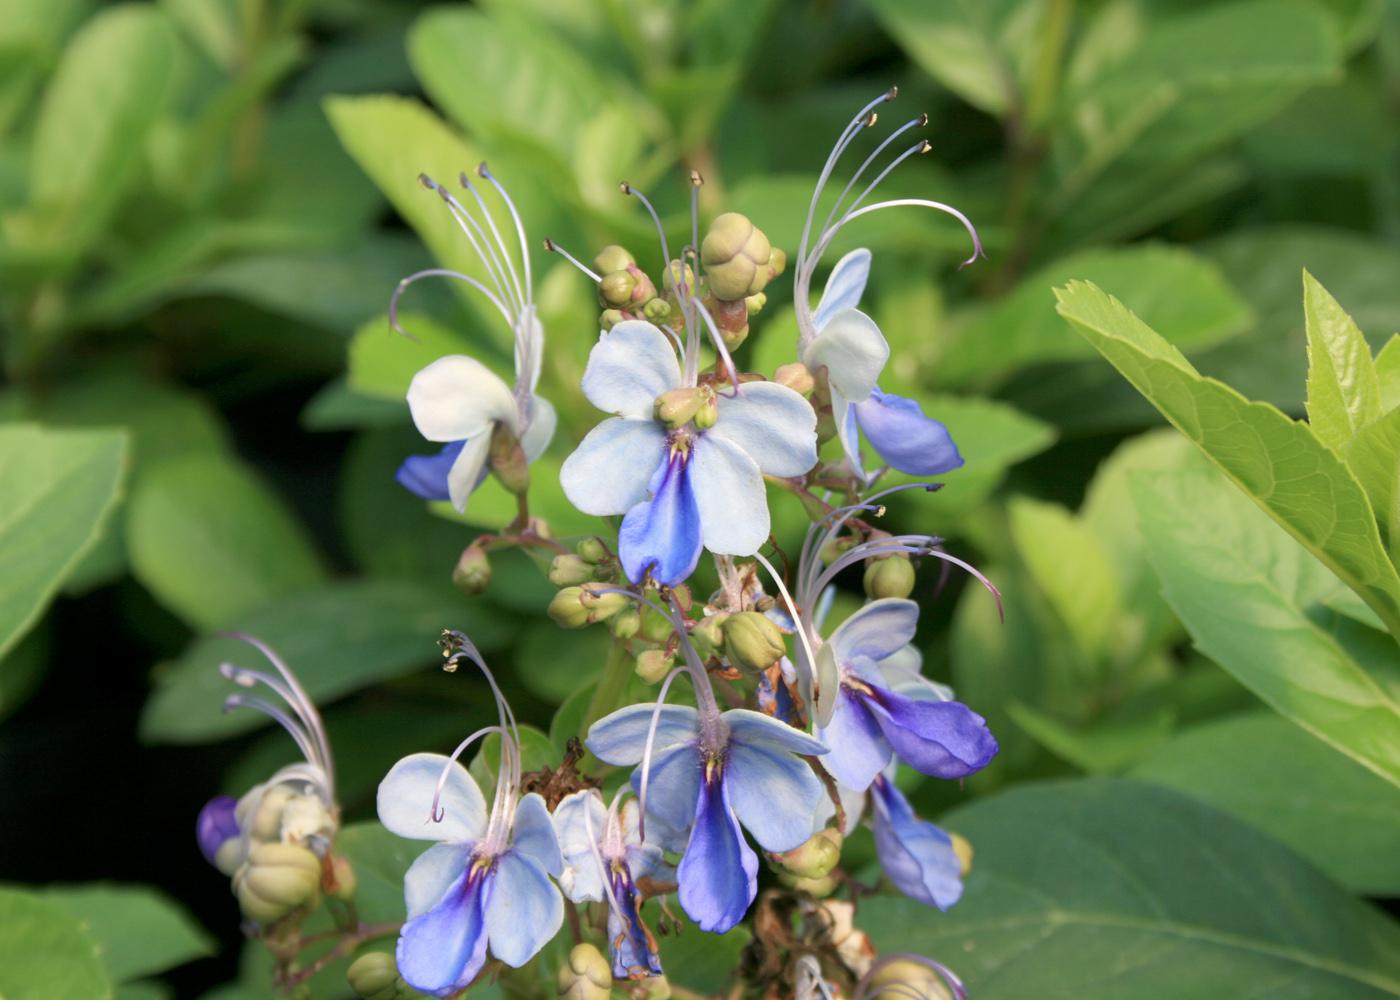 Blue butterfly plants have intricate flowers that actually resemble little blue butterflies in flight. (Photo by MSU Extension Service/Gary Bachman)